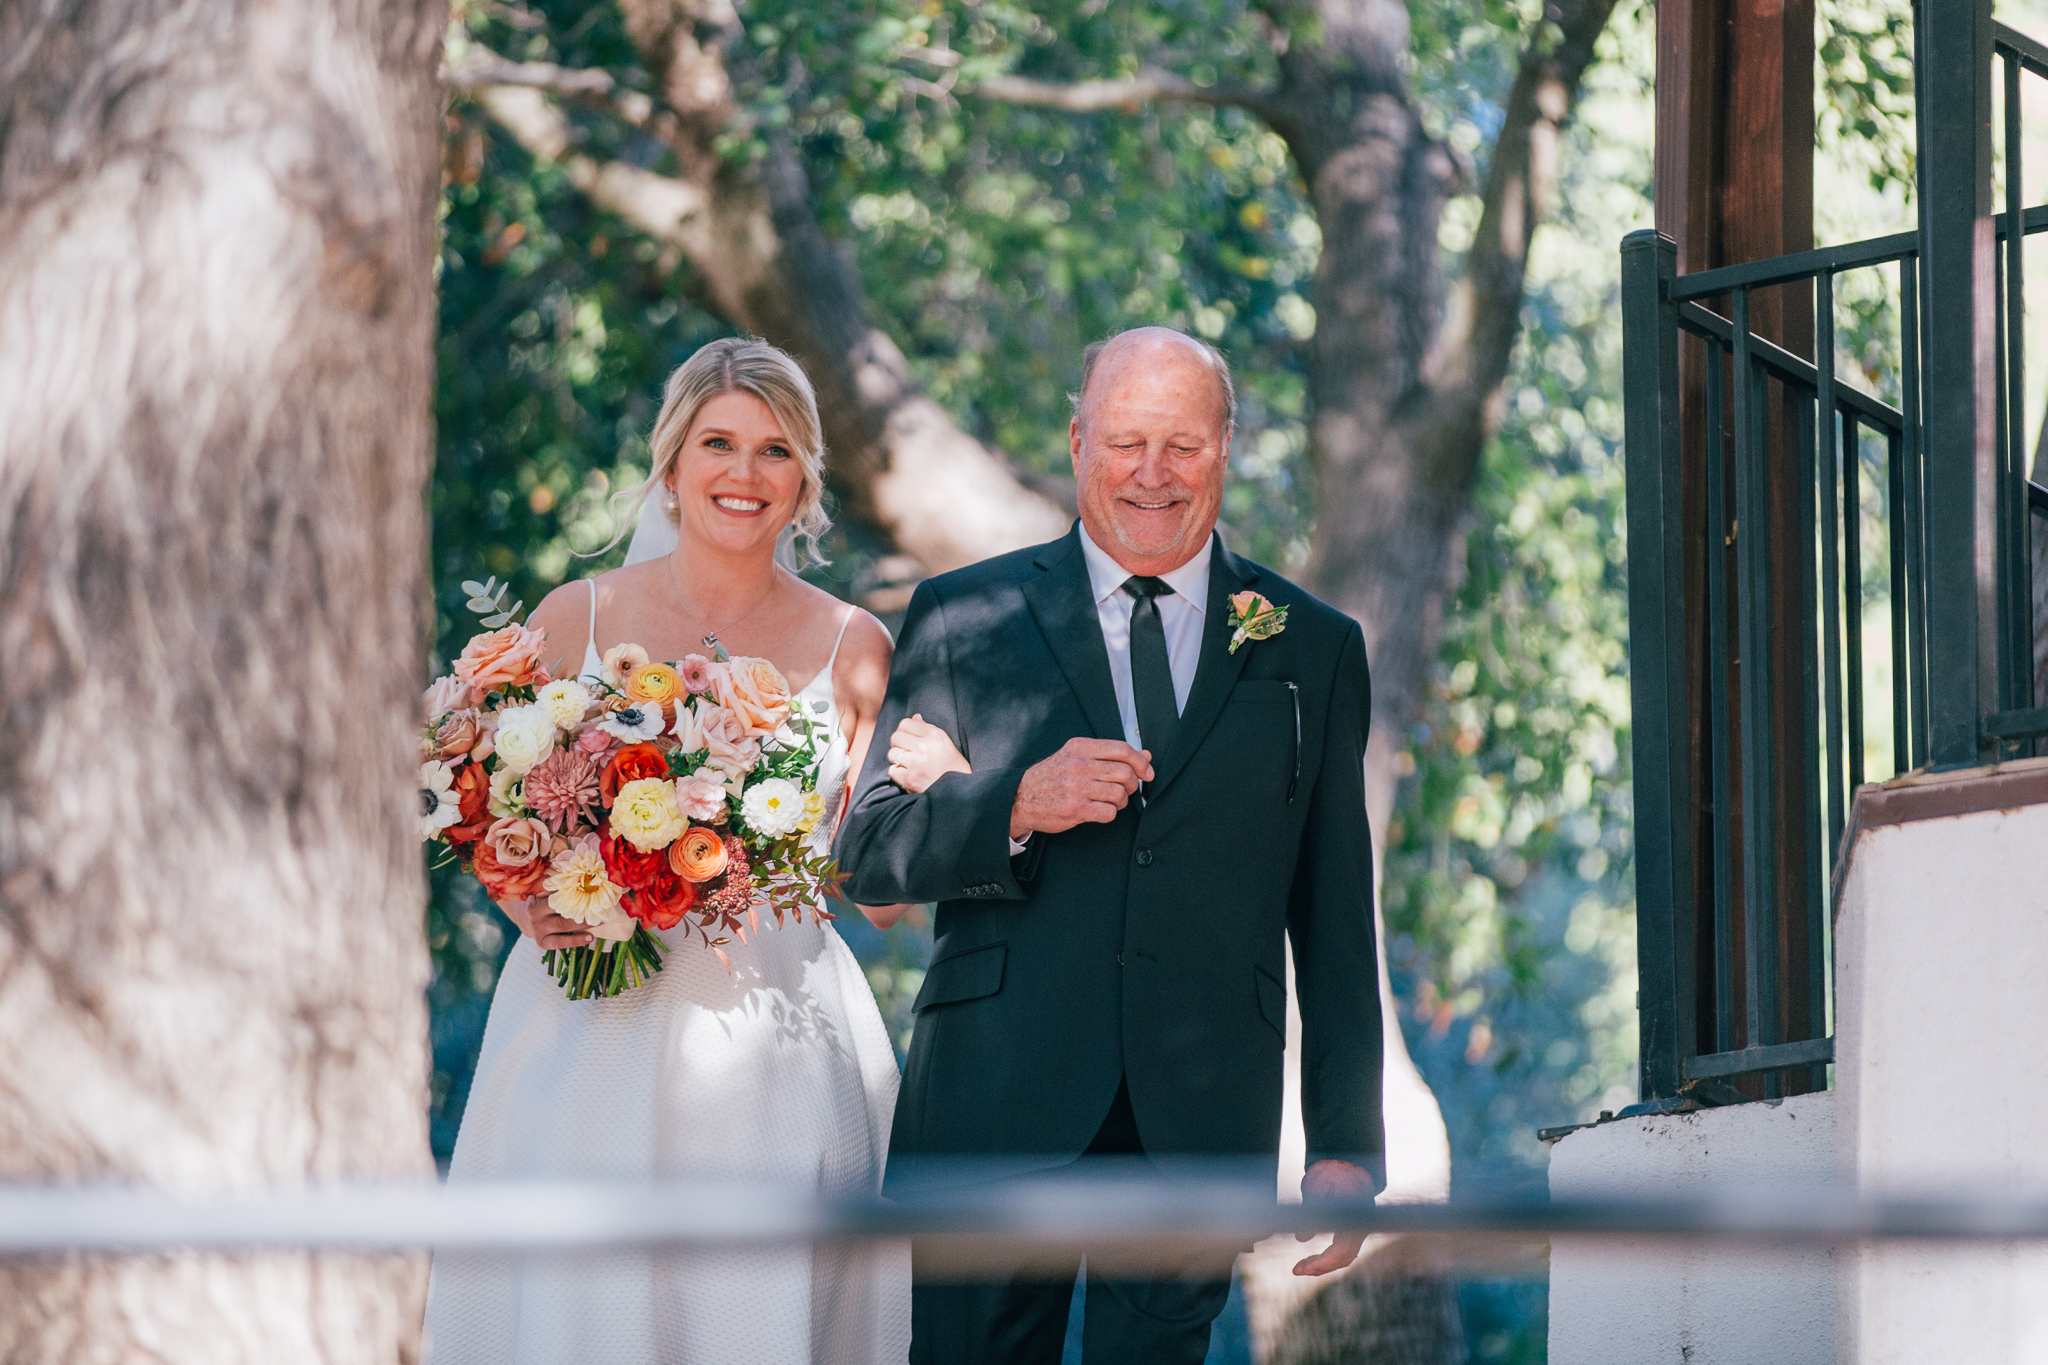 bride in spaghetti strap wedding dress and vibrant wedding bouquet walks with father down aisle